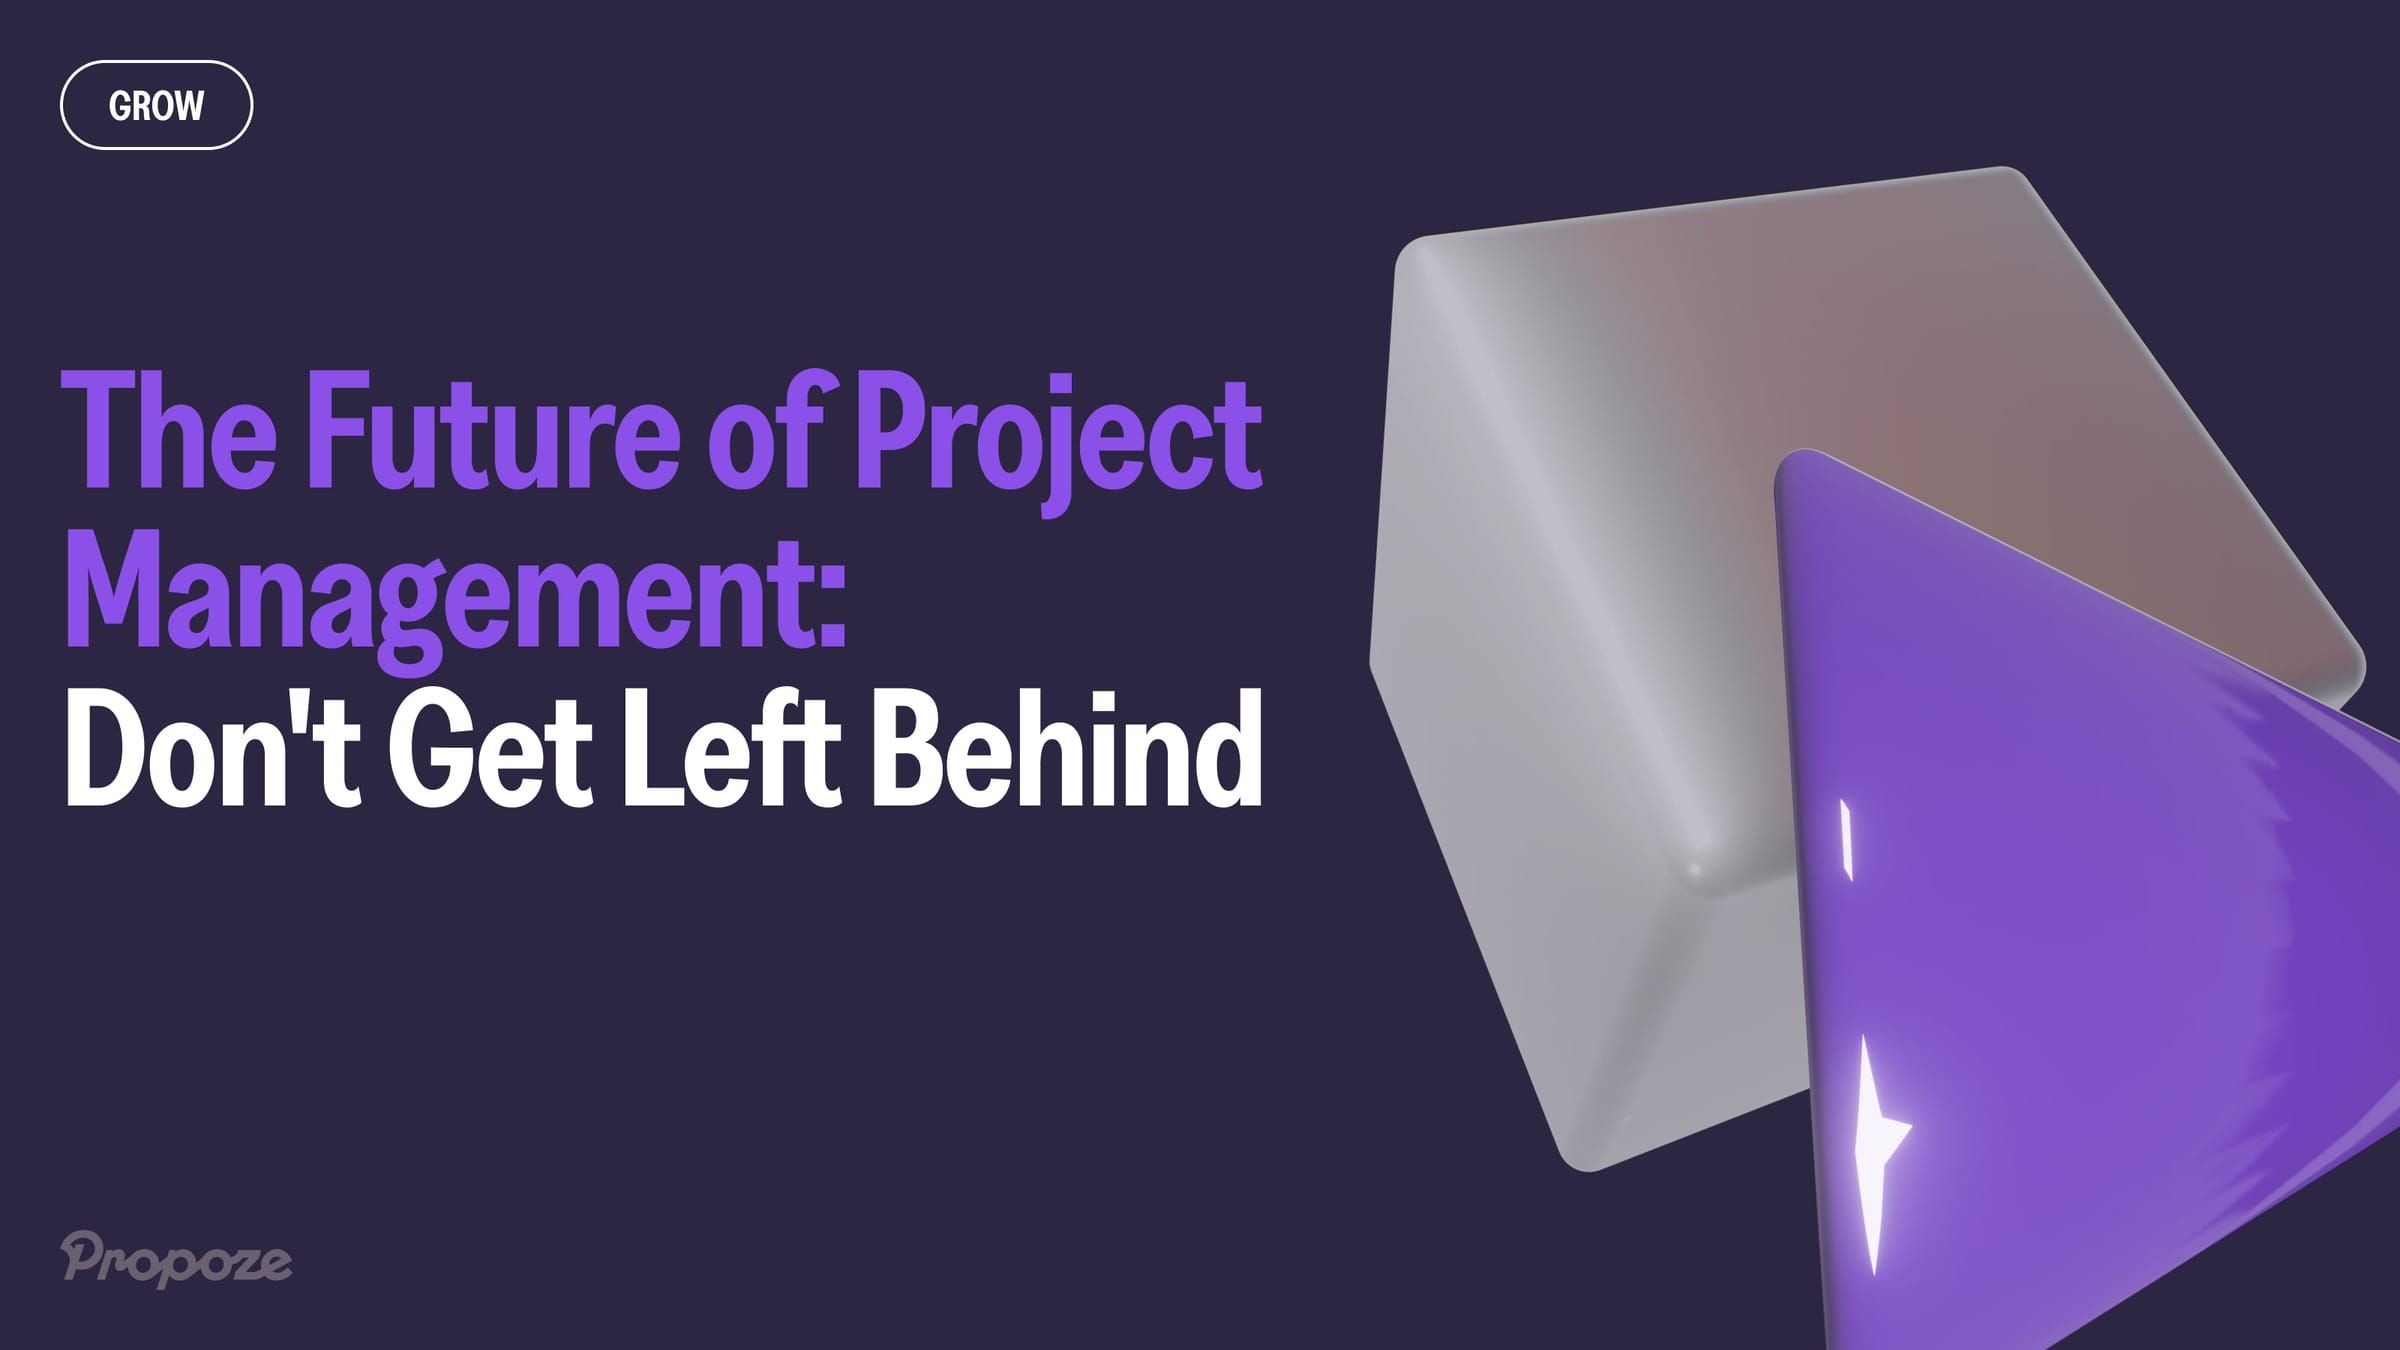 The Future of Project Management: Don't Get Left Behind